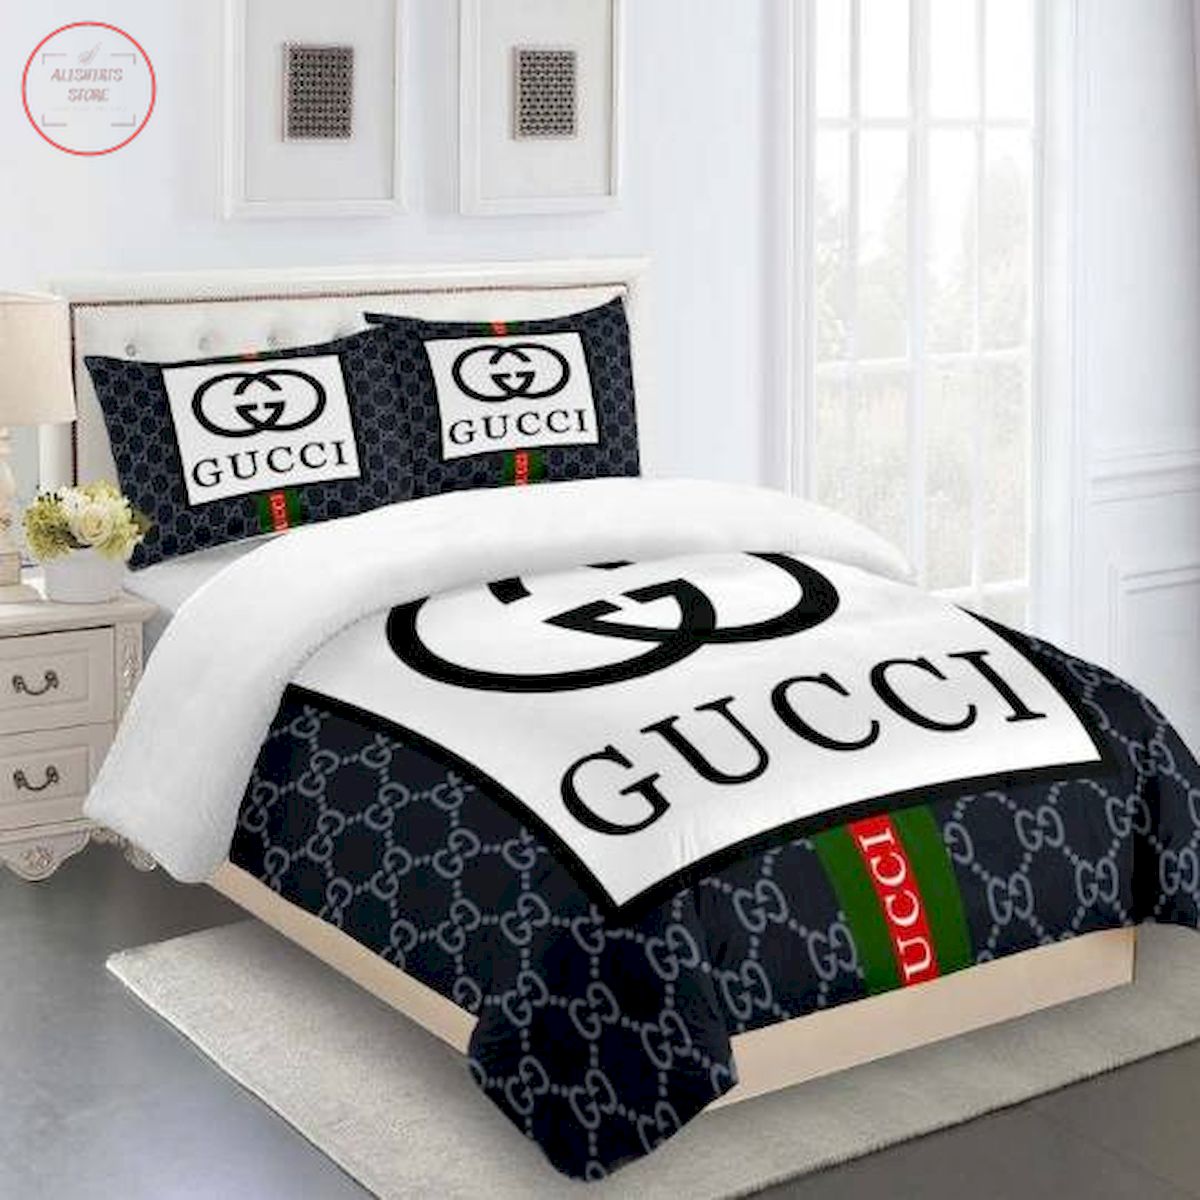 Gucci bedding set blue and white Luxury bed sheets